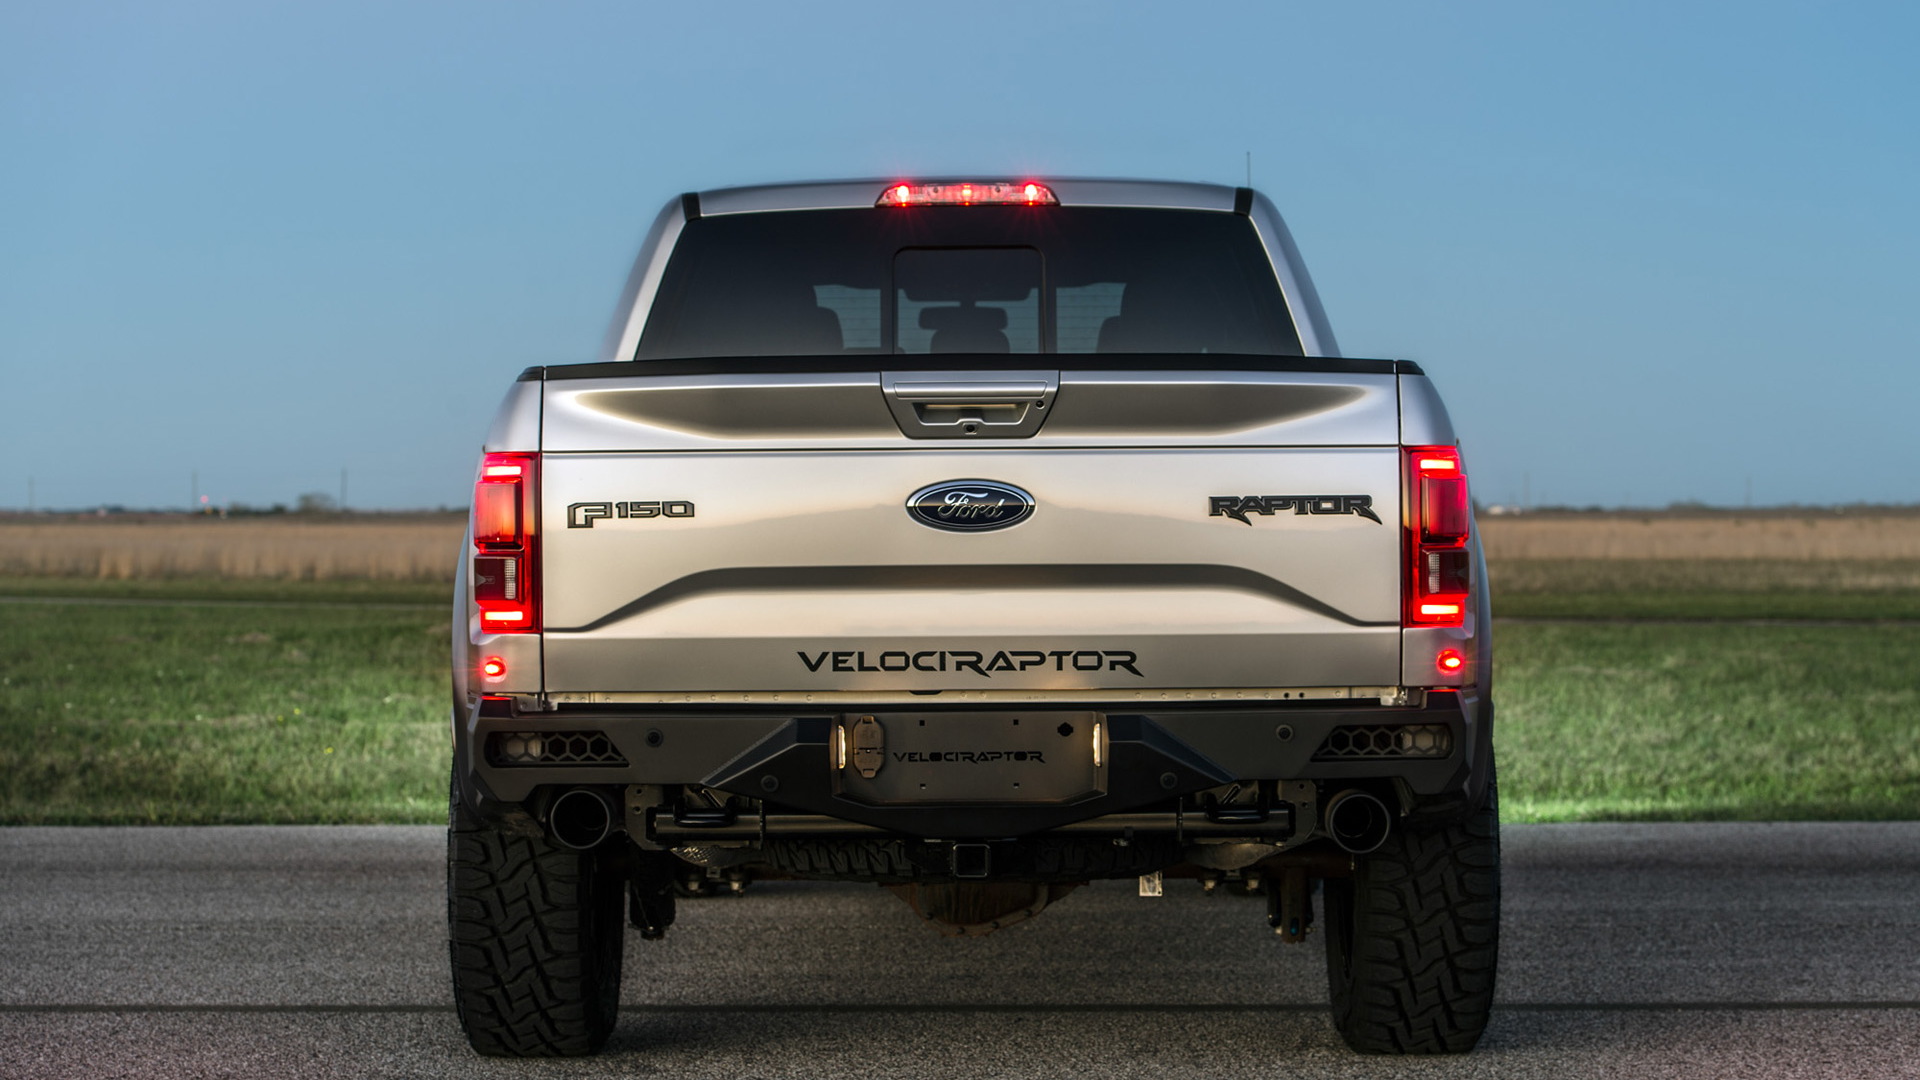 2017 Hennessey VelociRaptor 600 Twin Turbo  based on the Ford F-150 Raptor